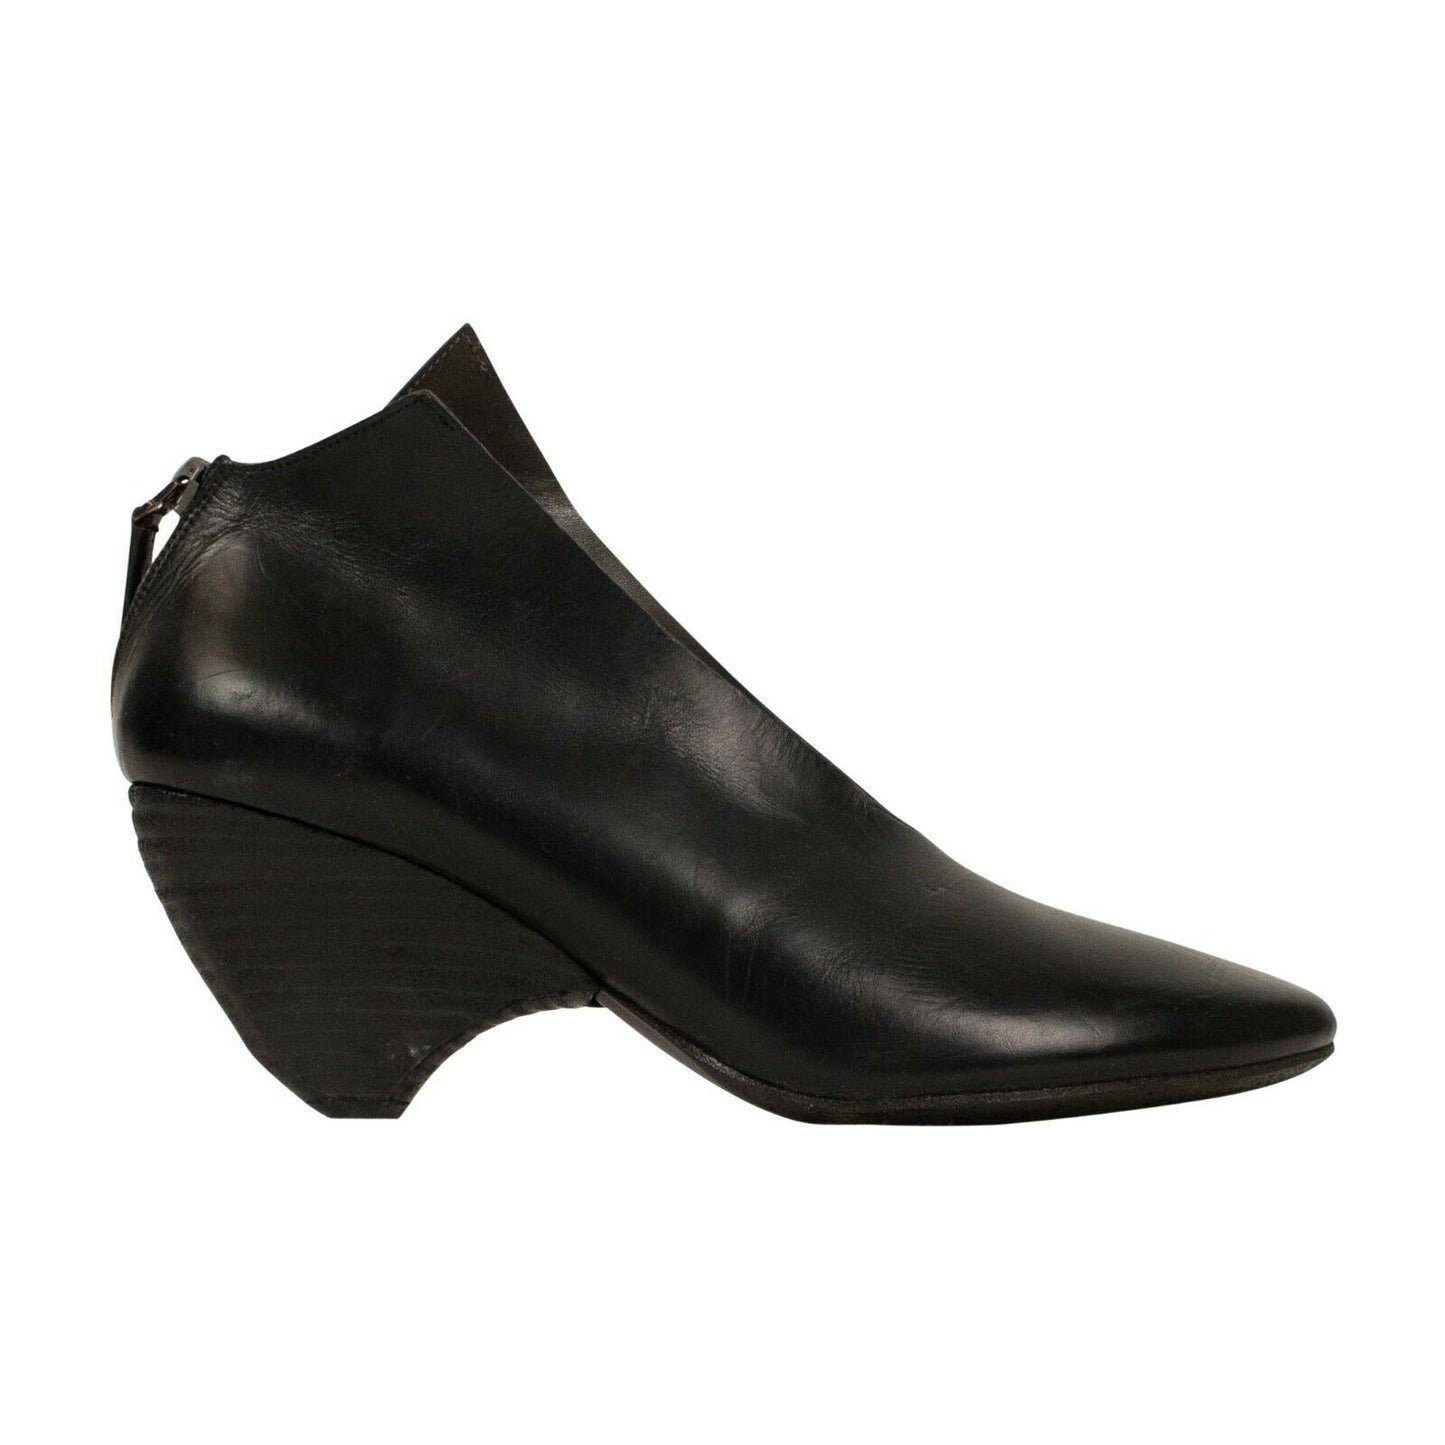 Marsell 'Livellina' Calf Skin Leather Ankle Boots - Black